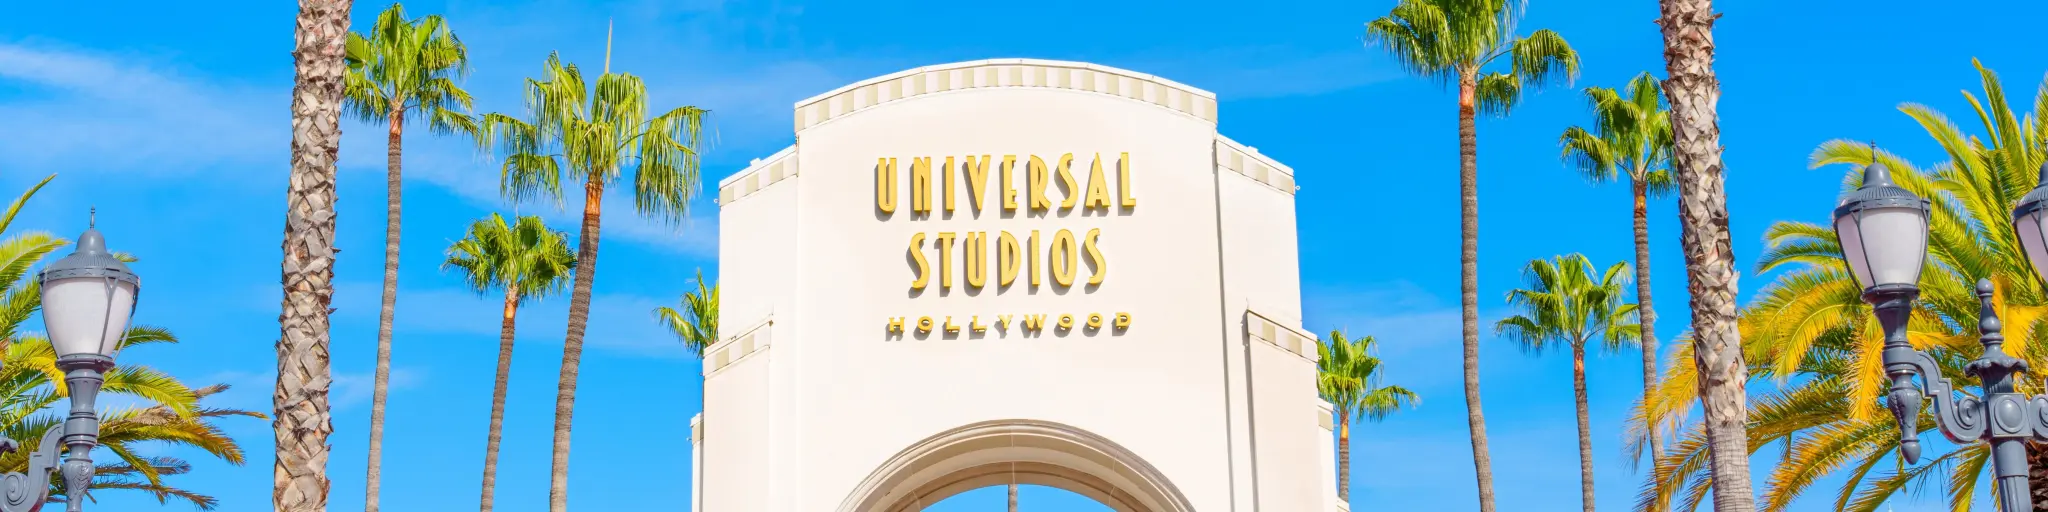 Main entrance of Universal Studios LA with palm trees and blue sky